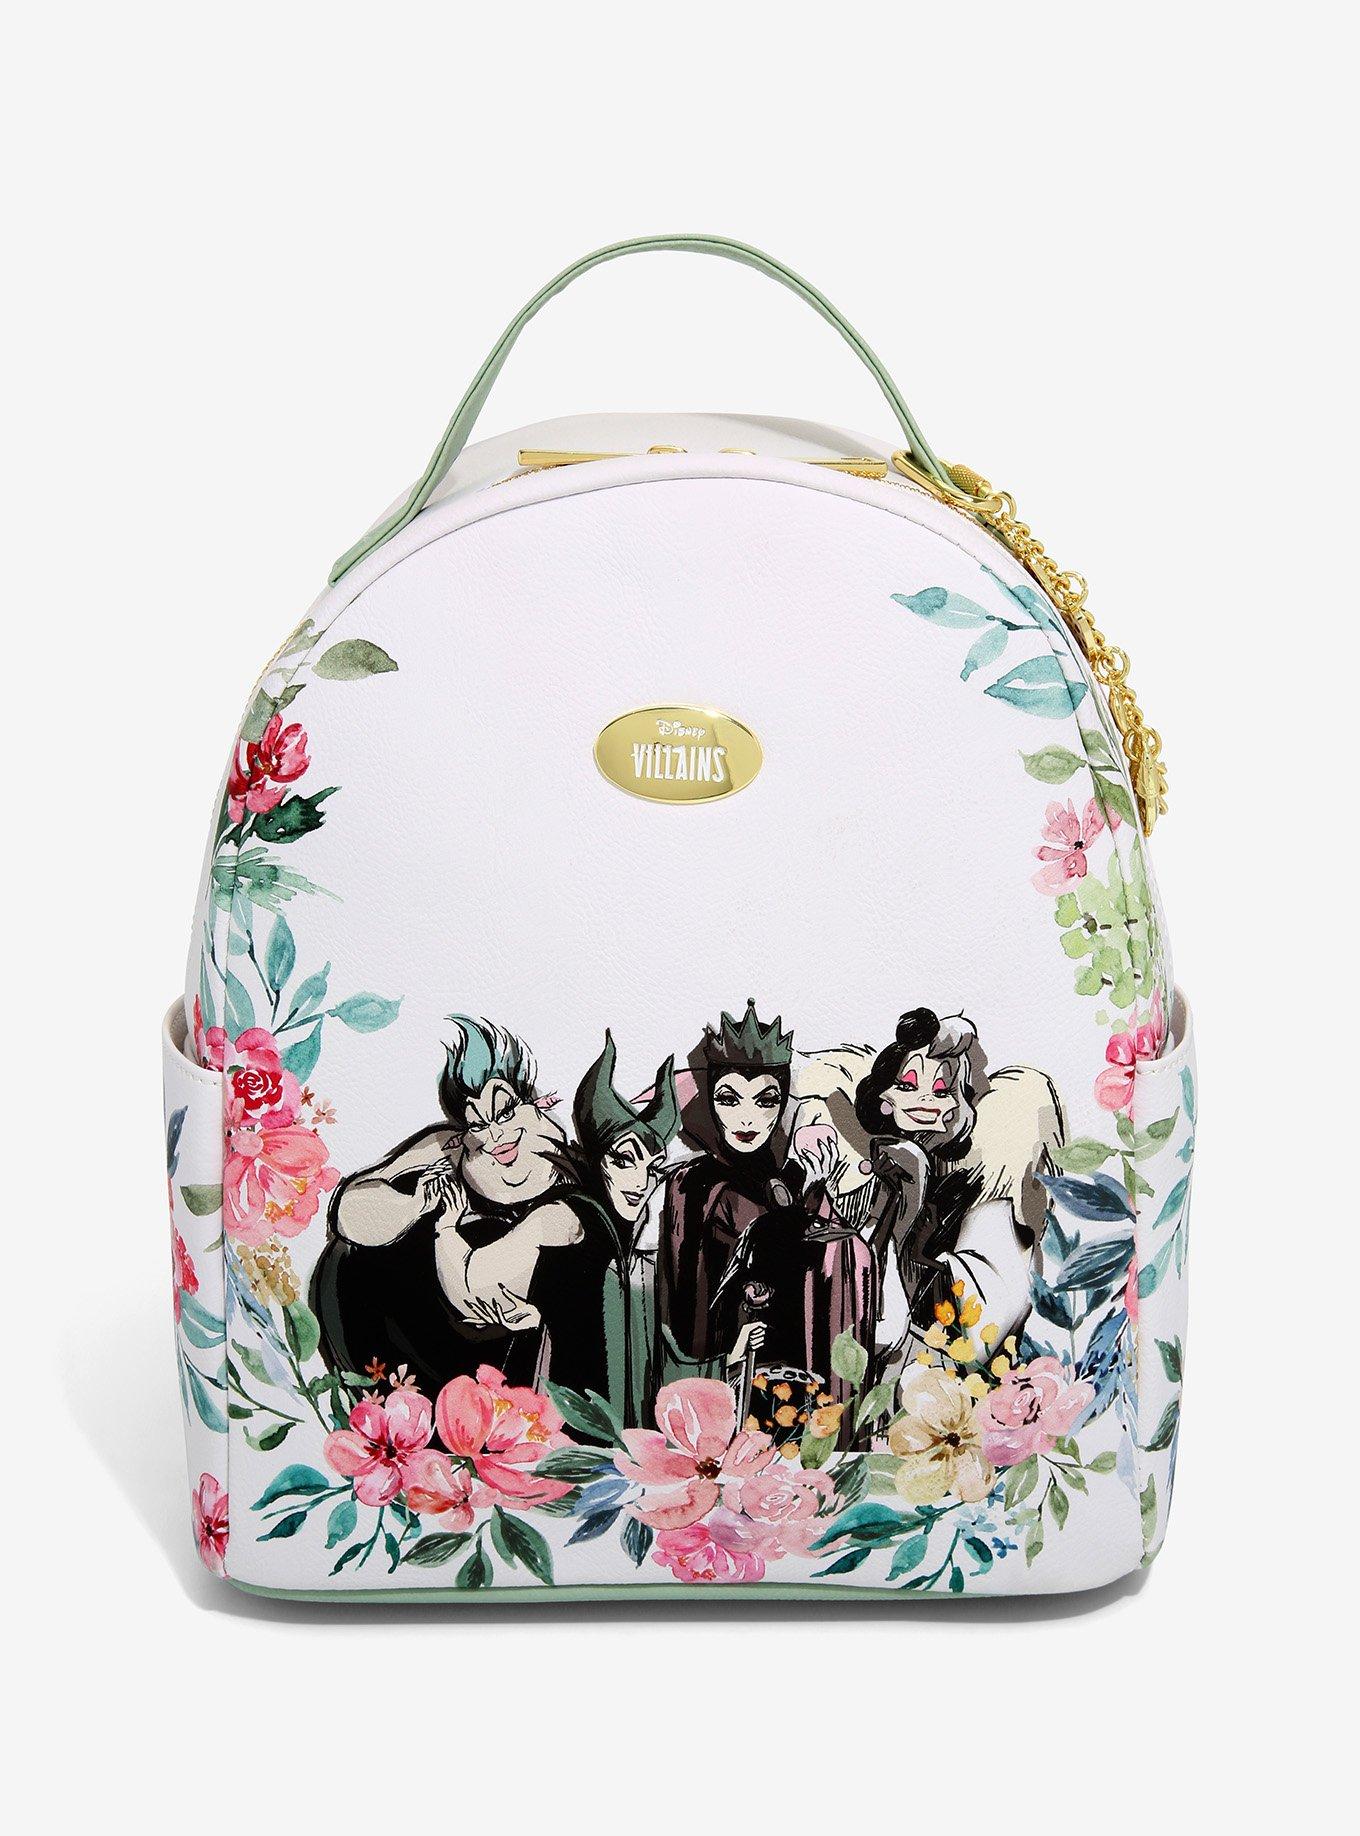 Loungefly Disney Villains Floral Mini Backpack New